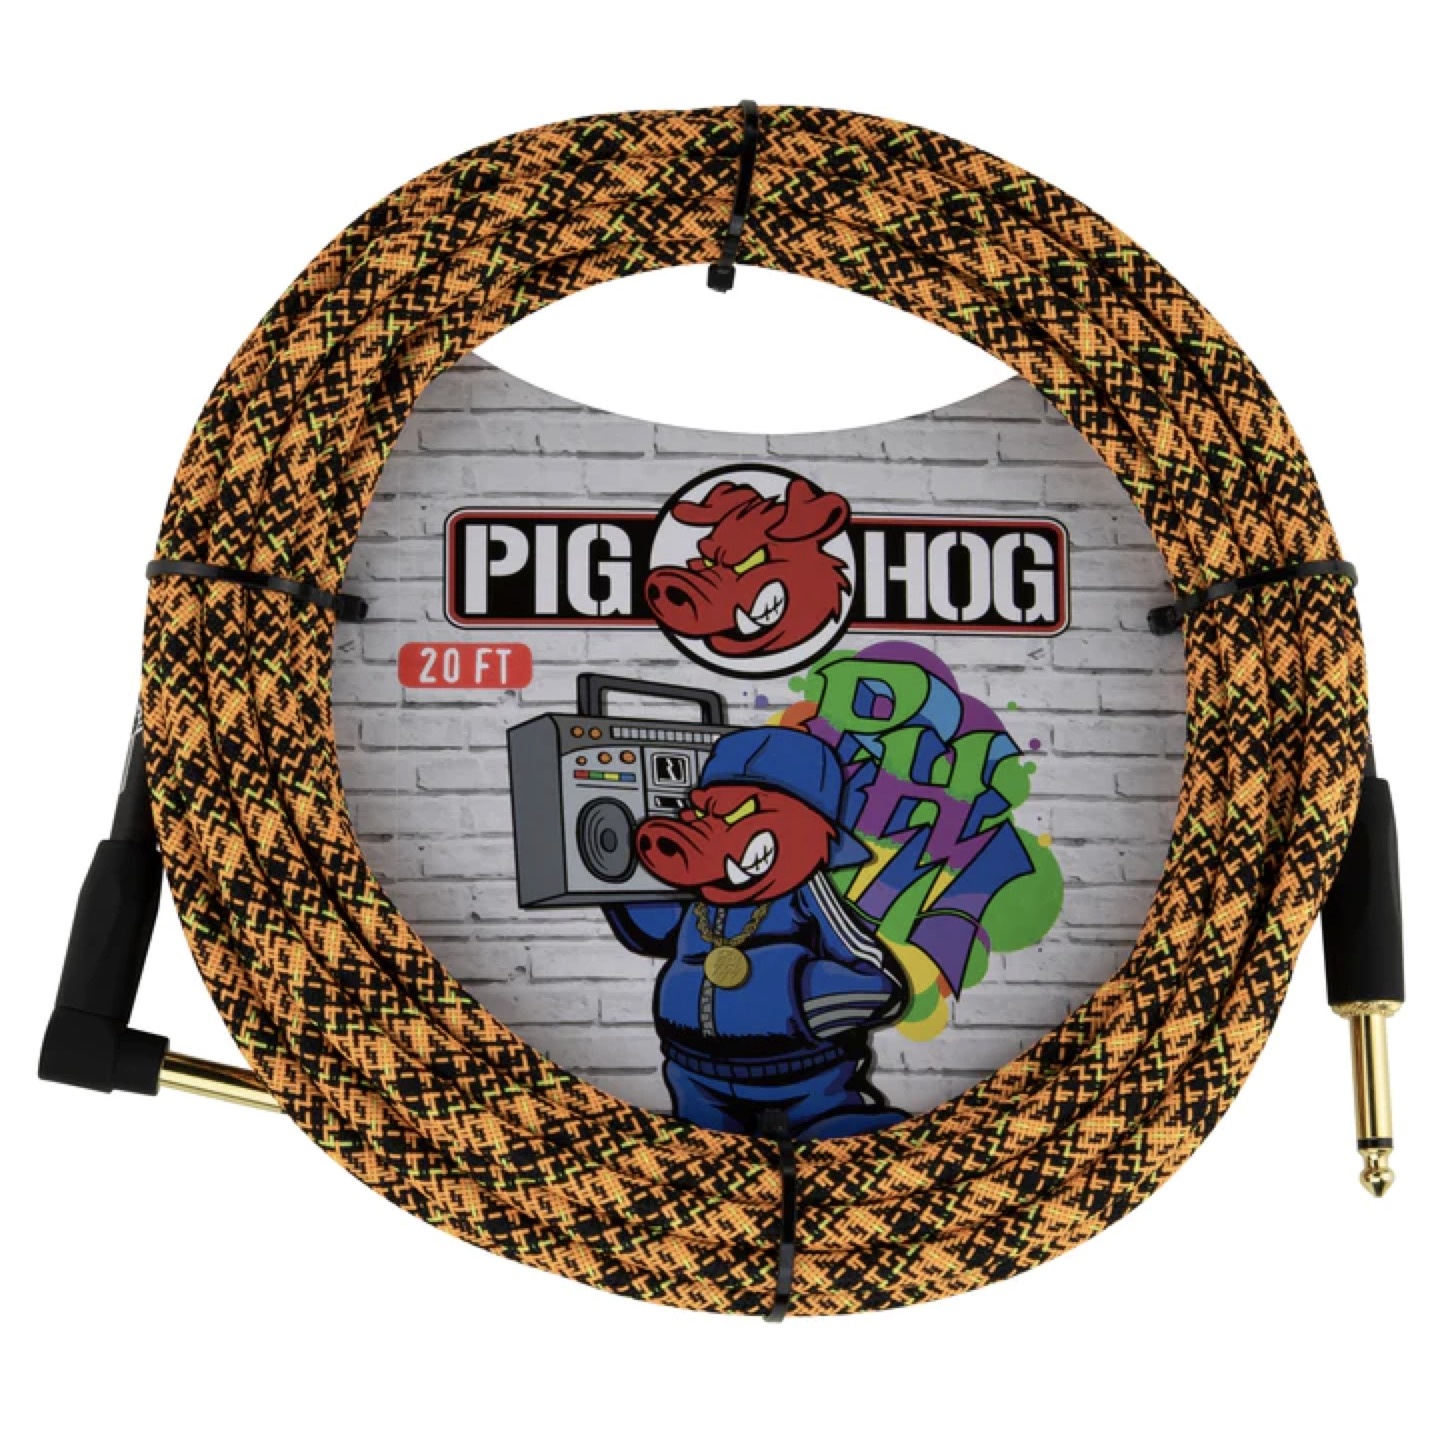 Pig Hog "Orange Graffiti" Woven Instrument Cable, 20 Ft Right Angle